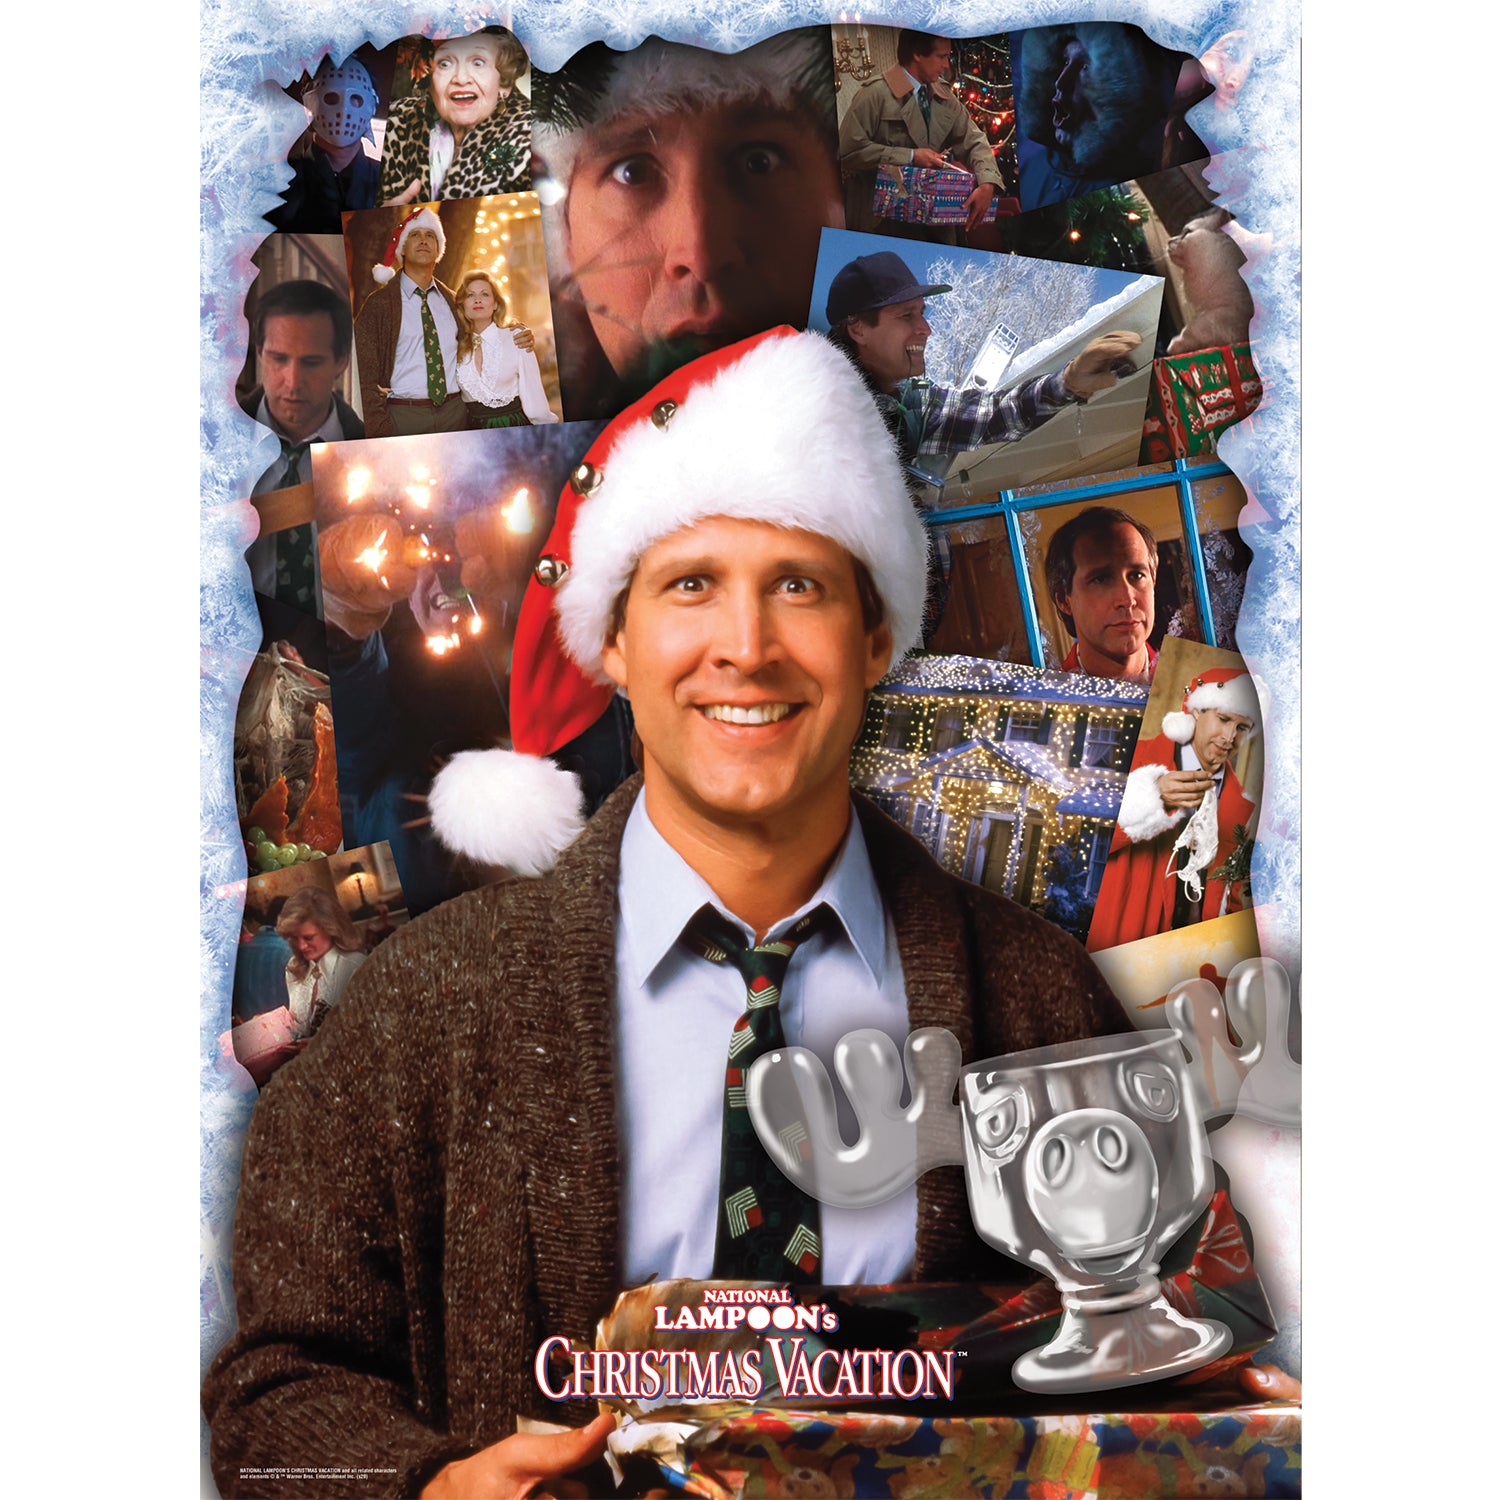 Christmas Vacation 1000 Piece Puzzle - Online Exclusive